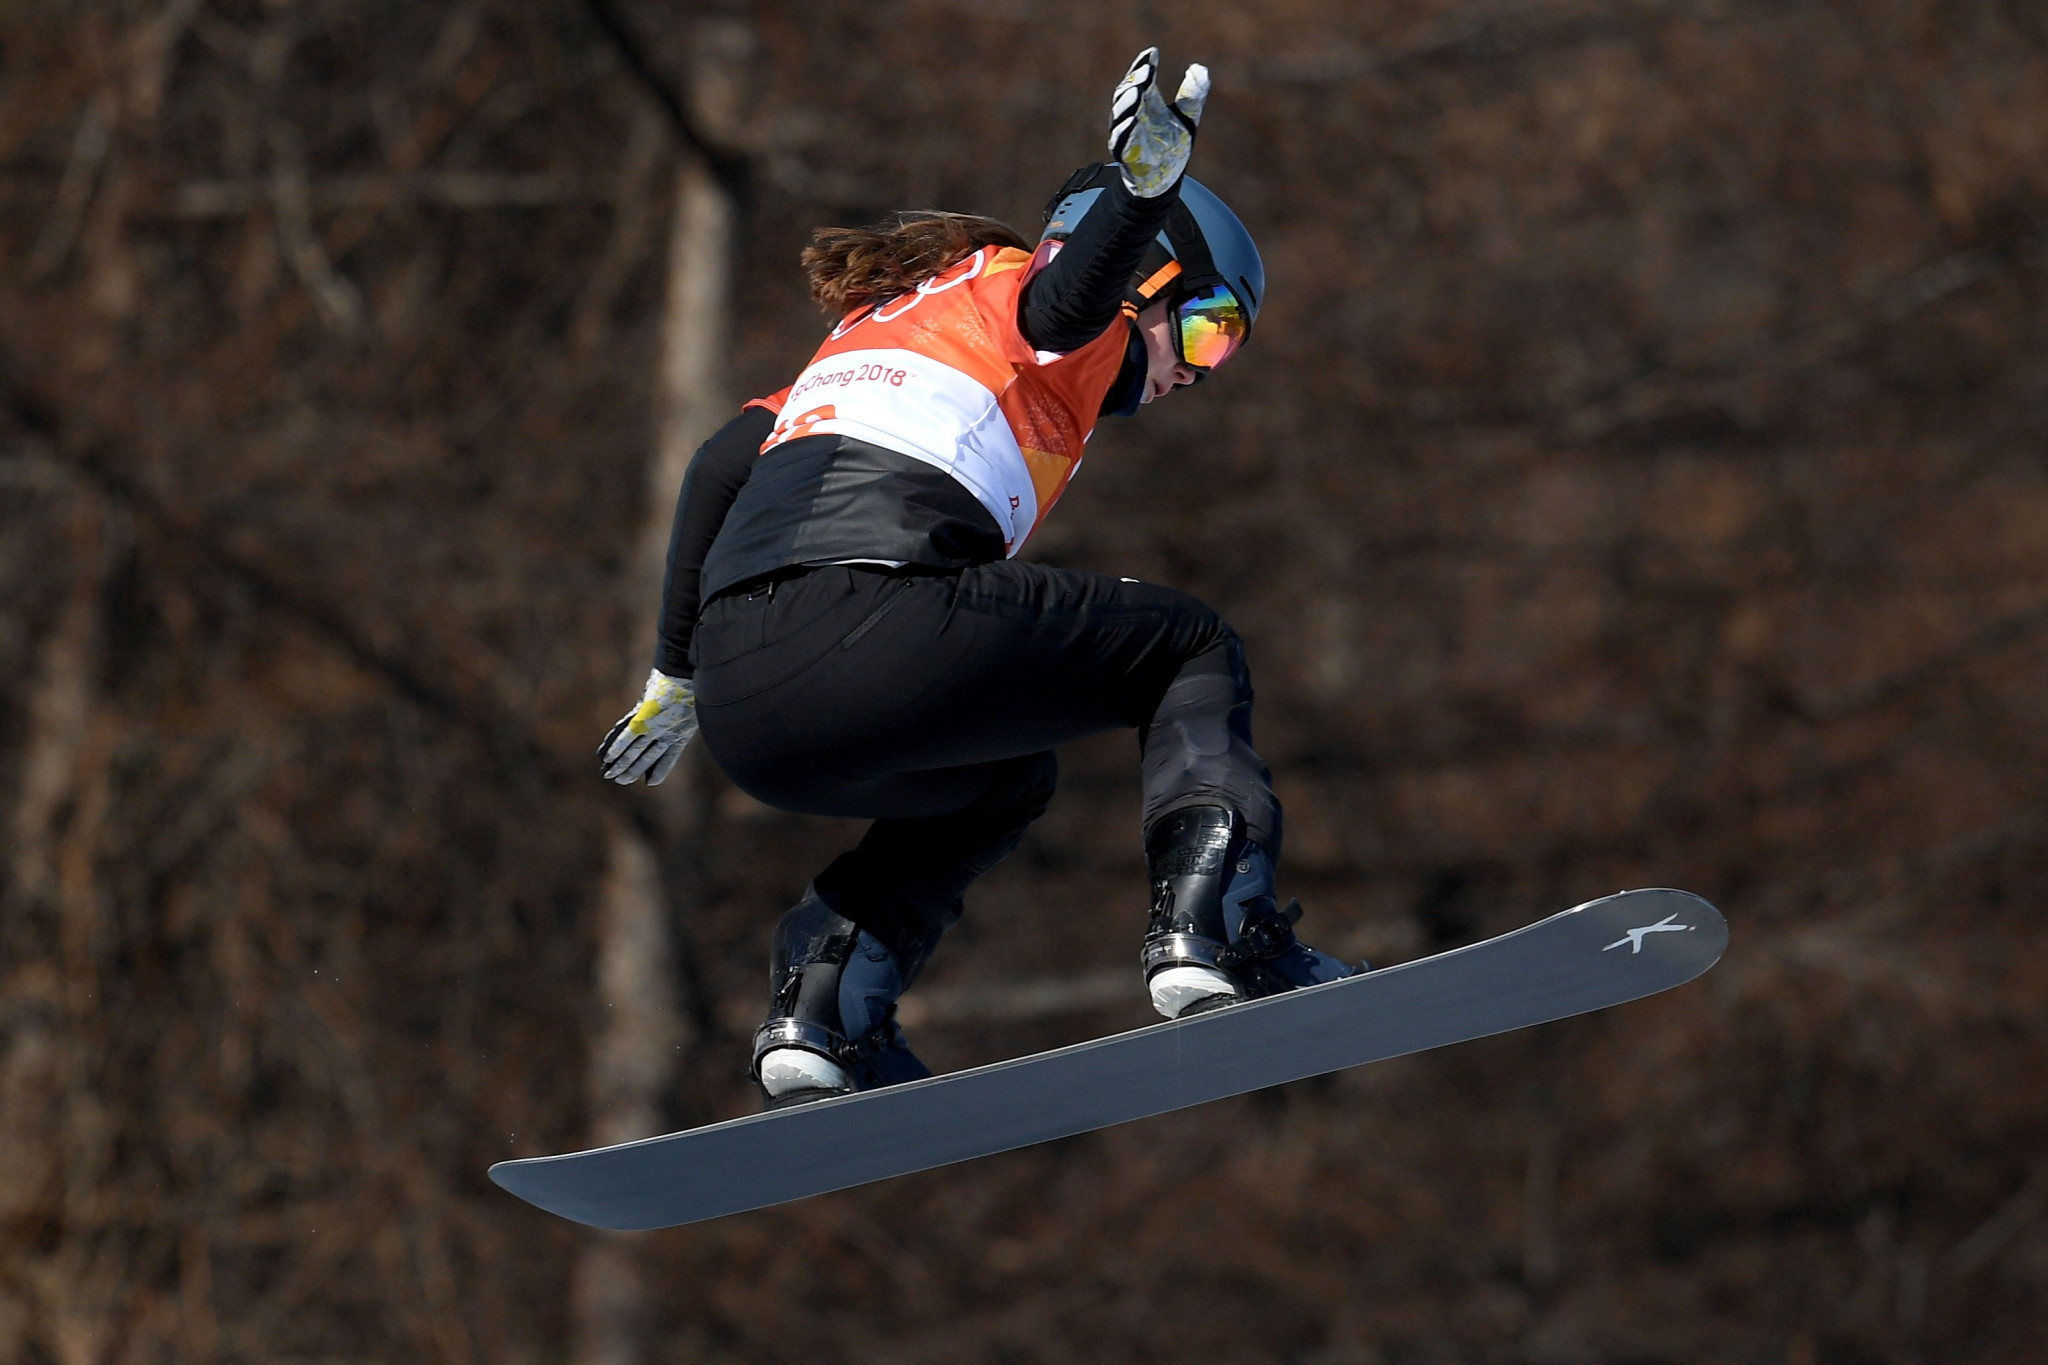 Germany's Jana Fischer sealed the women's snowboard cross title at the FIS Freestyle Ski World Junior Championships ©Getty Images